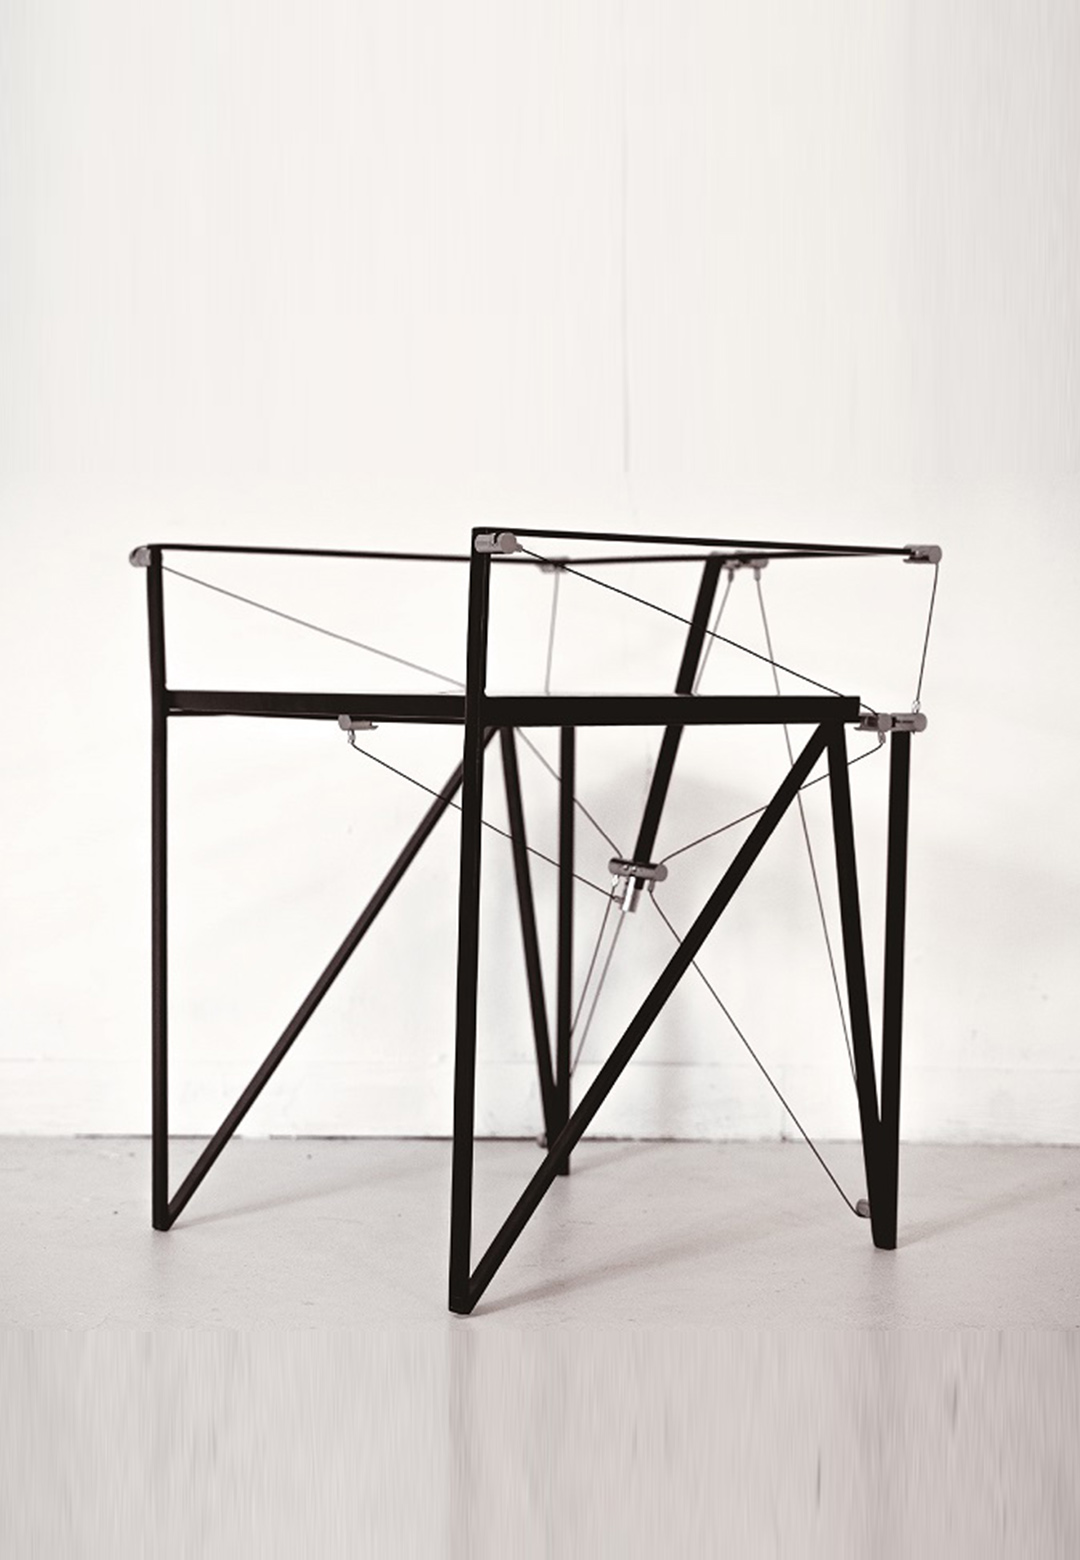 Elegance in 'Tension': SFEHO’s evolution towards practical and minimalist furniture